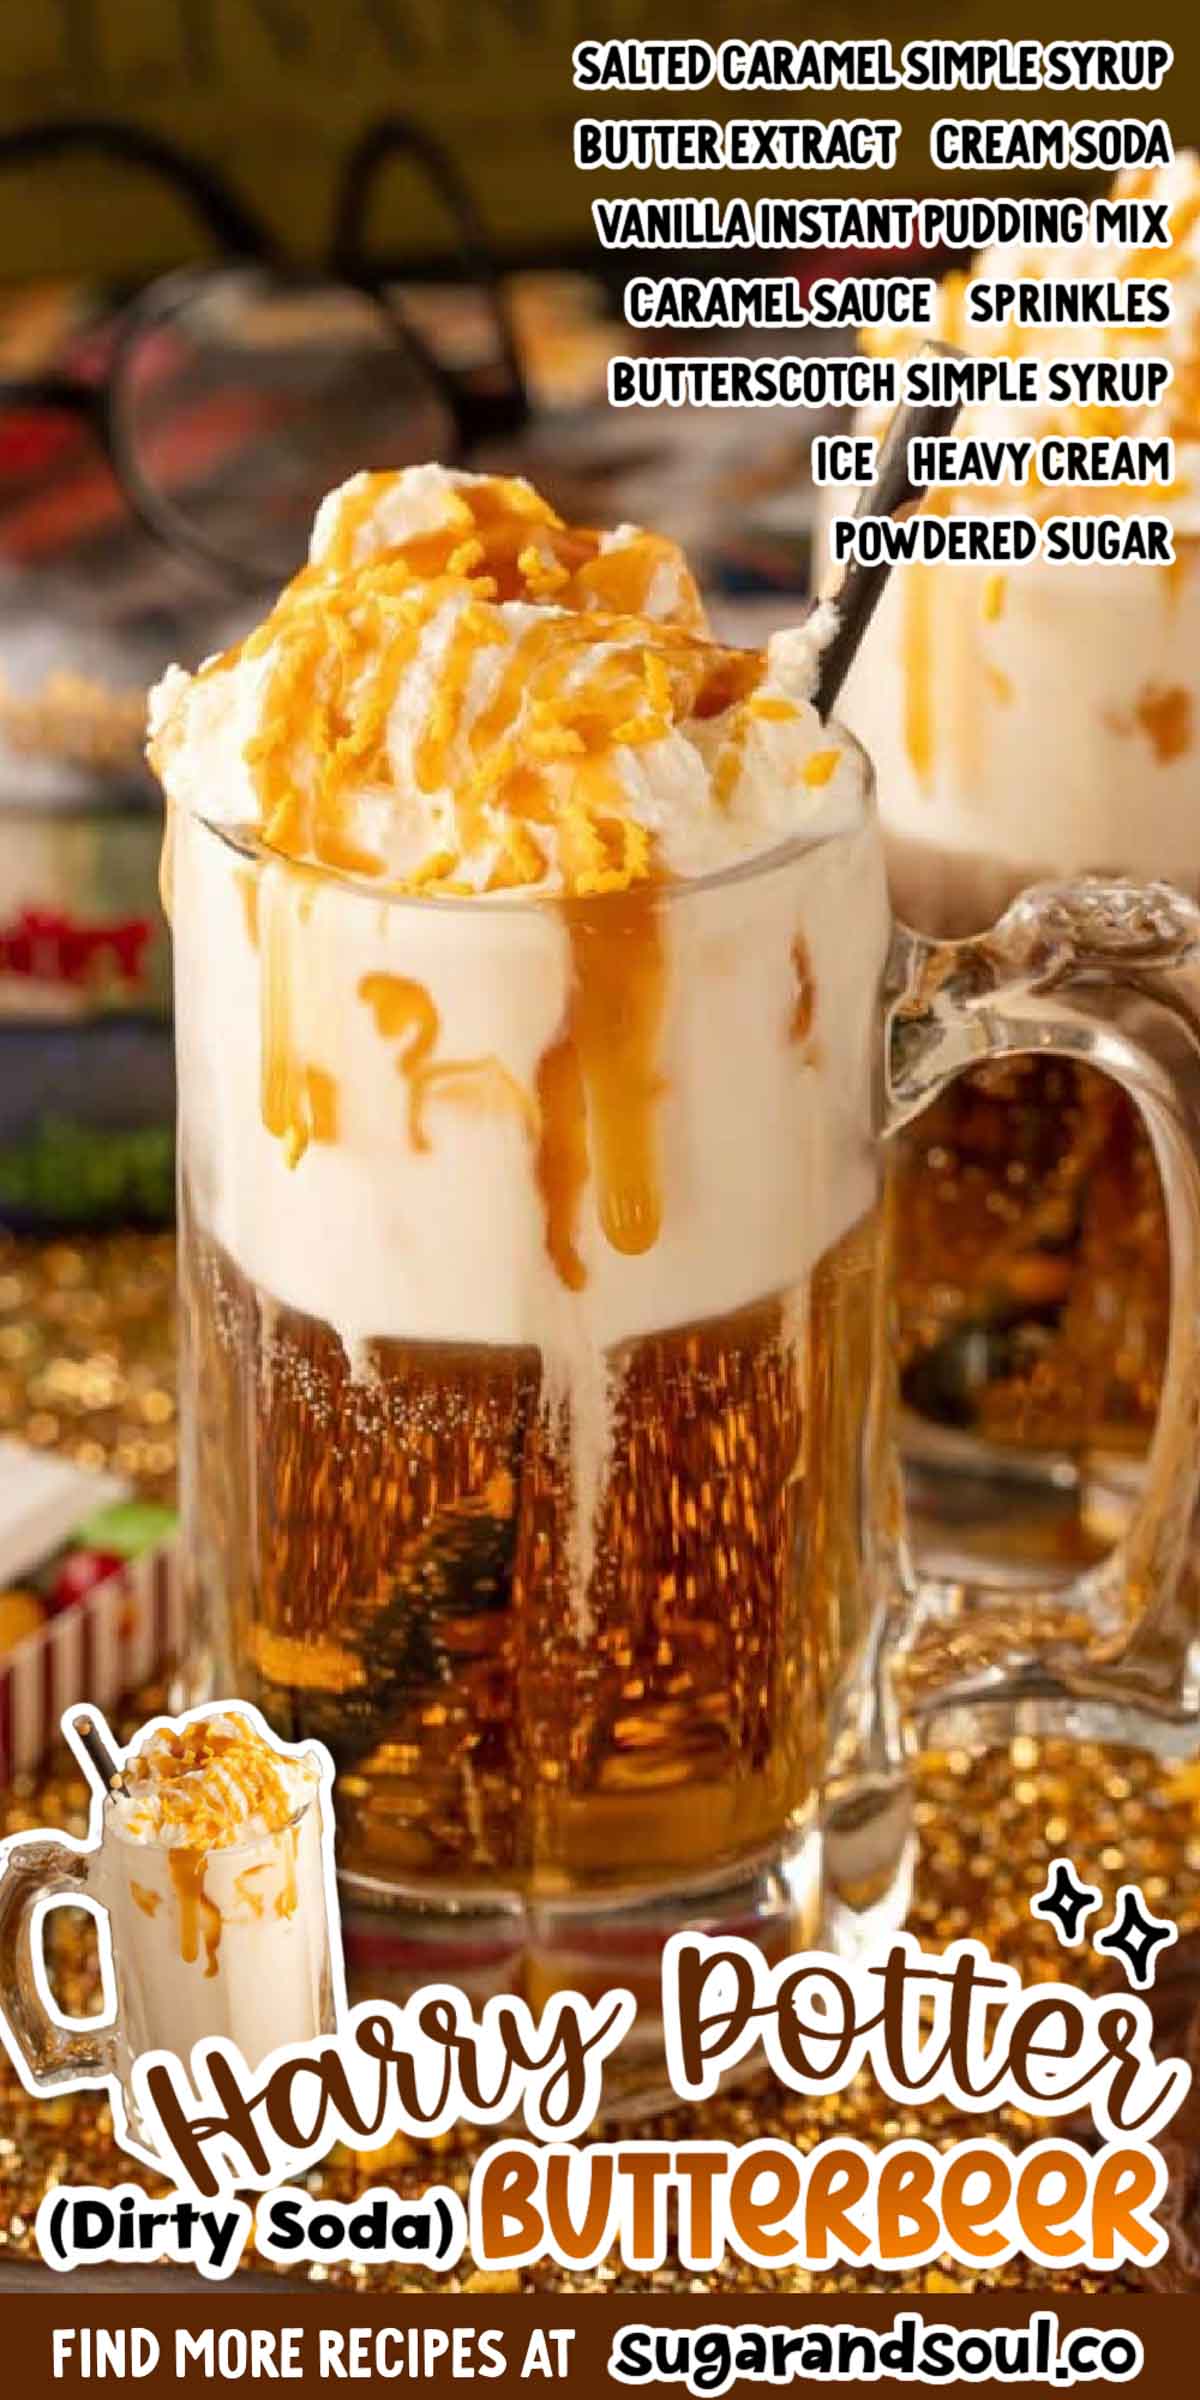 Harry Potter Butterbeer Dirty Soda is every muggle's favorite drink that's made of cream soda, caramel and butterscotch syrups, butter extract, and cream! You don't need a house elf to make this recipe for you, it's super easy and ready to enjoy in just 5 minutes or less! via @sugarandsoulco